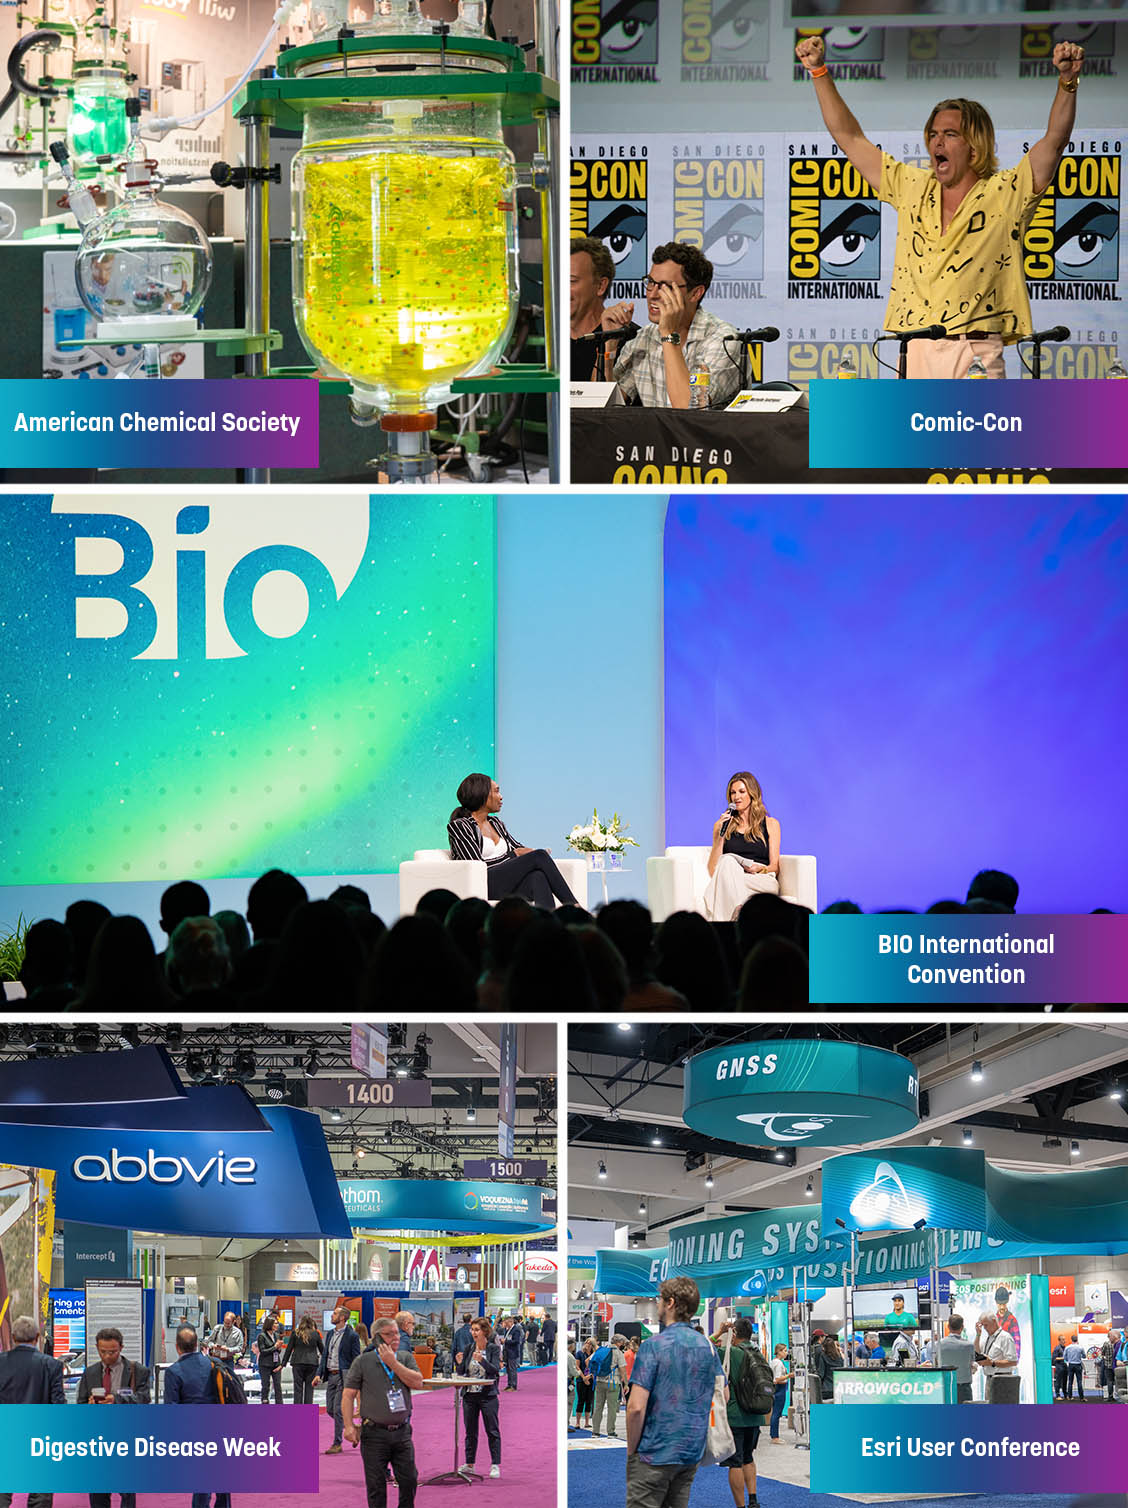 Images from some of the top conventions for economic impact generation.